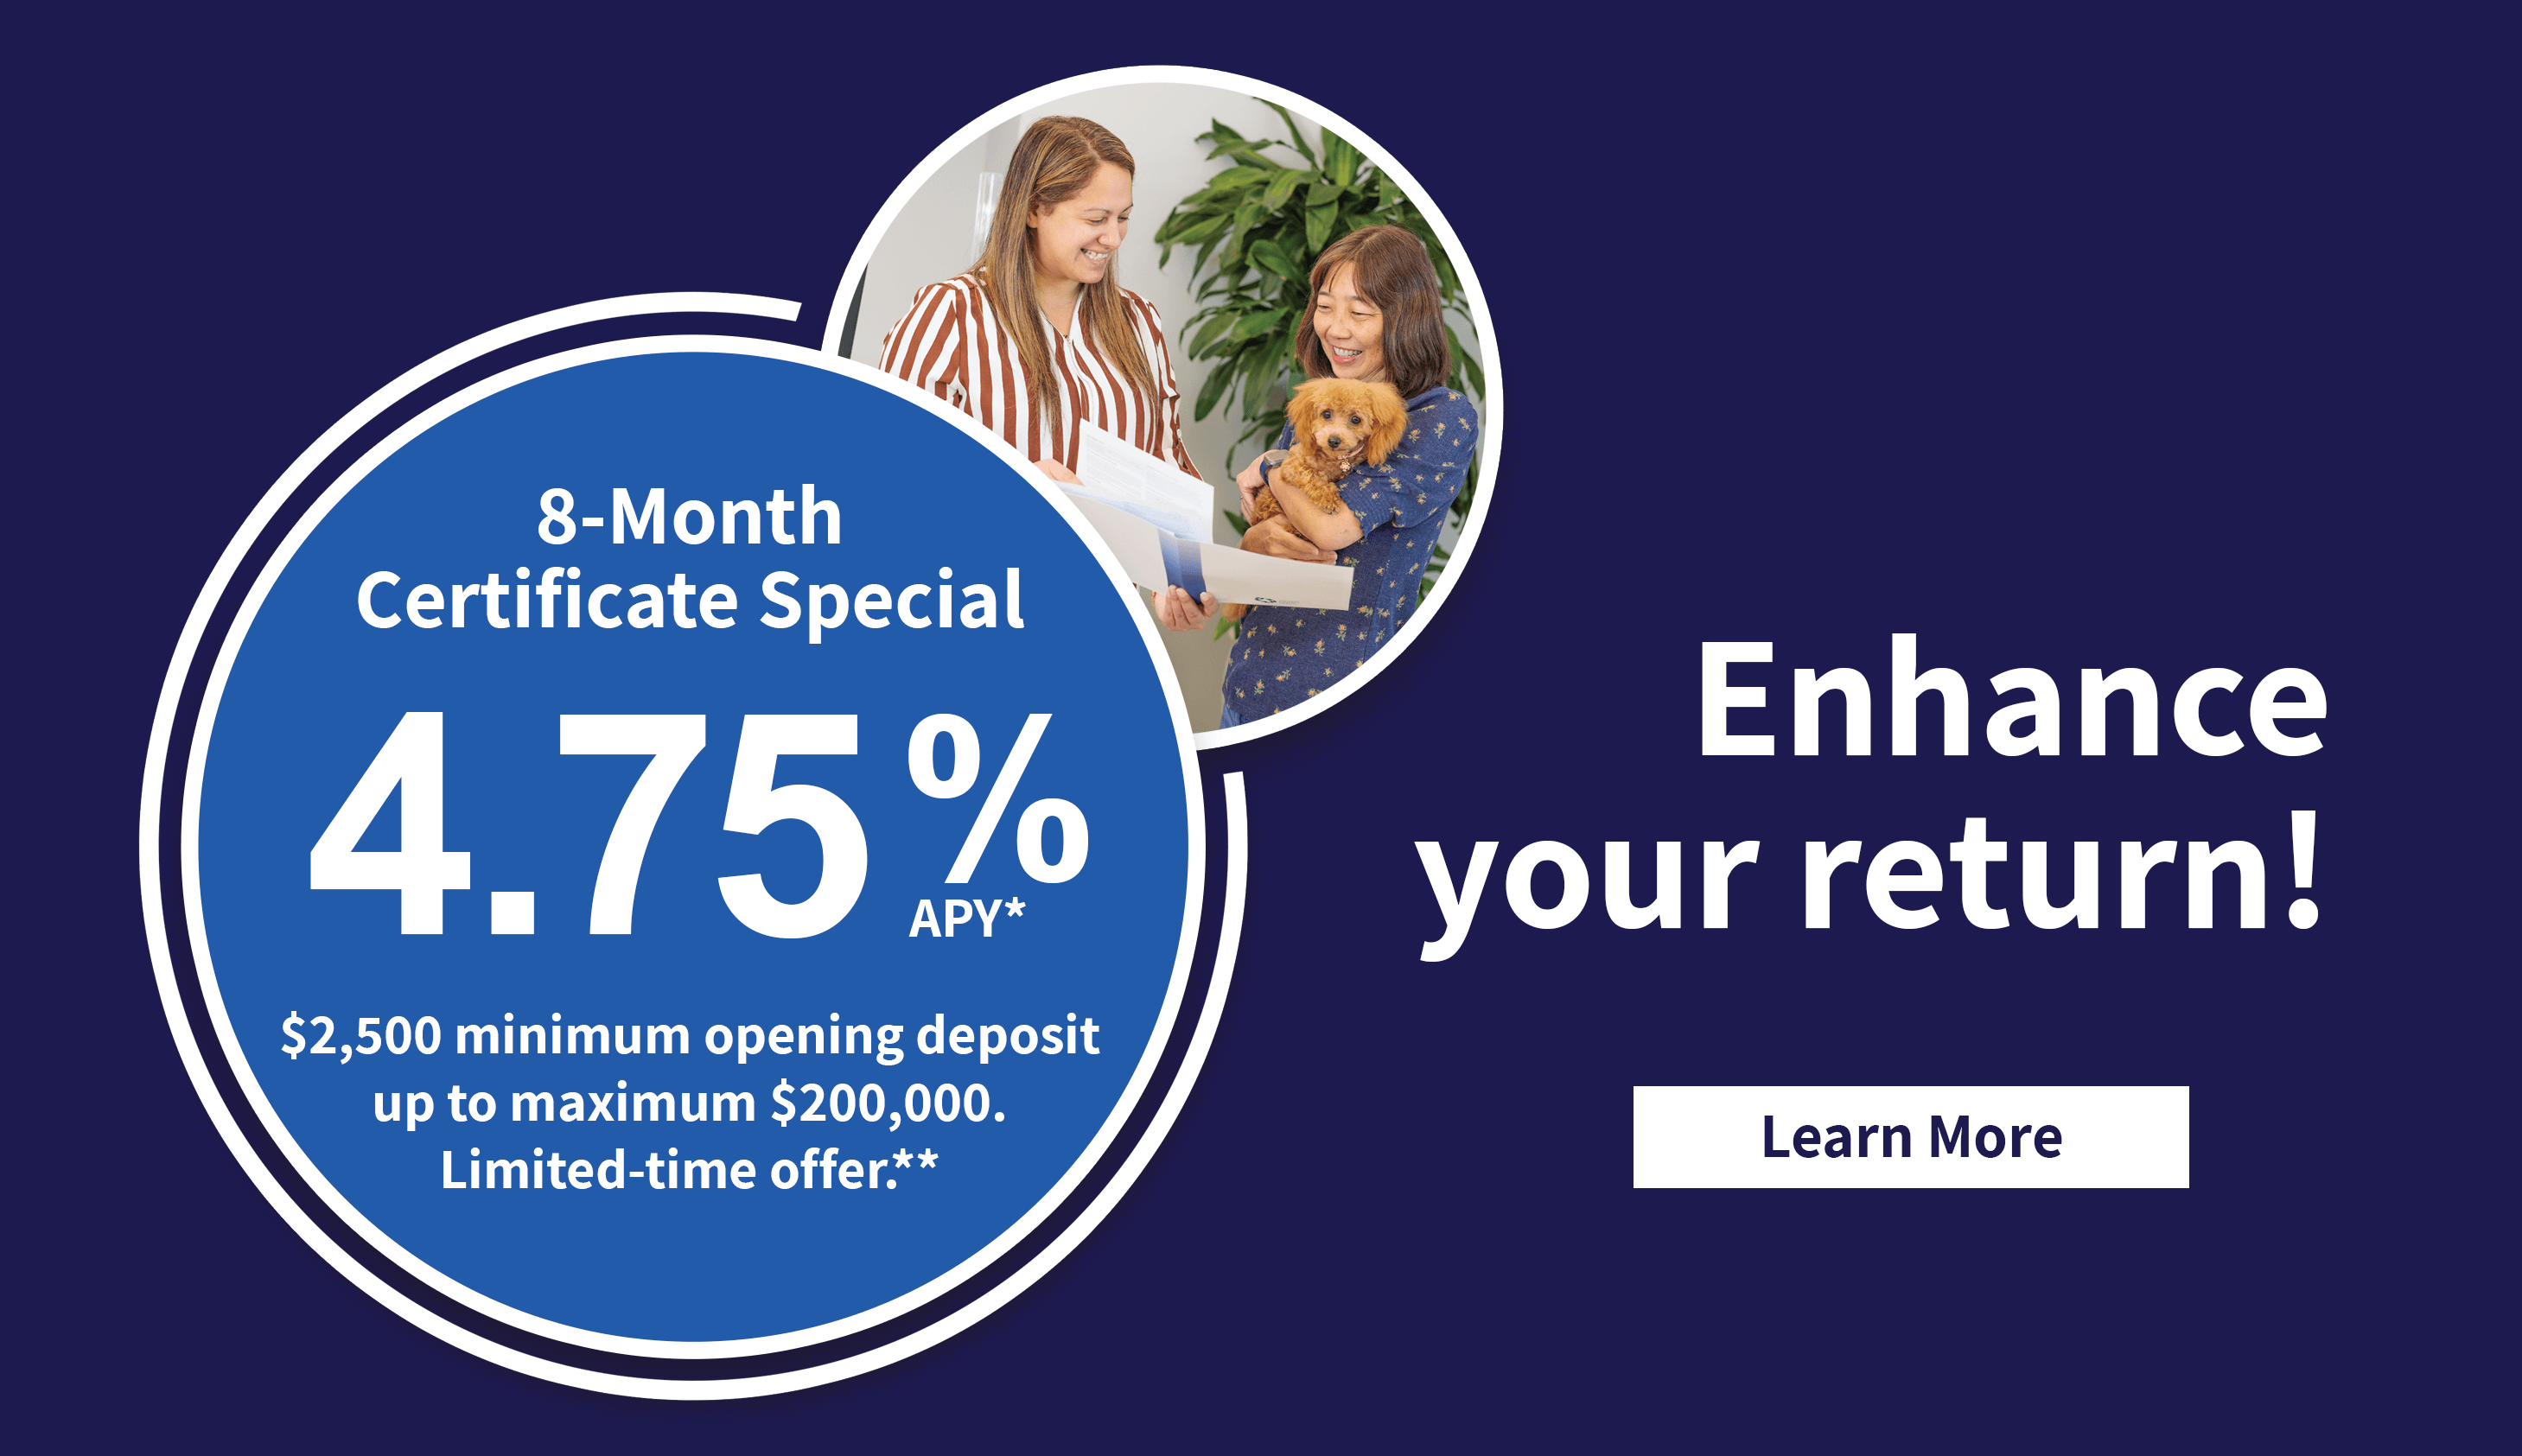 Enhance your return! 8-Month Certificate Special 4.75% APY*. $2,500 minimum opening deposit up to maximum $200,000. Limited-time offer**